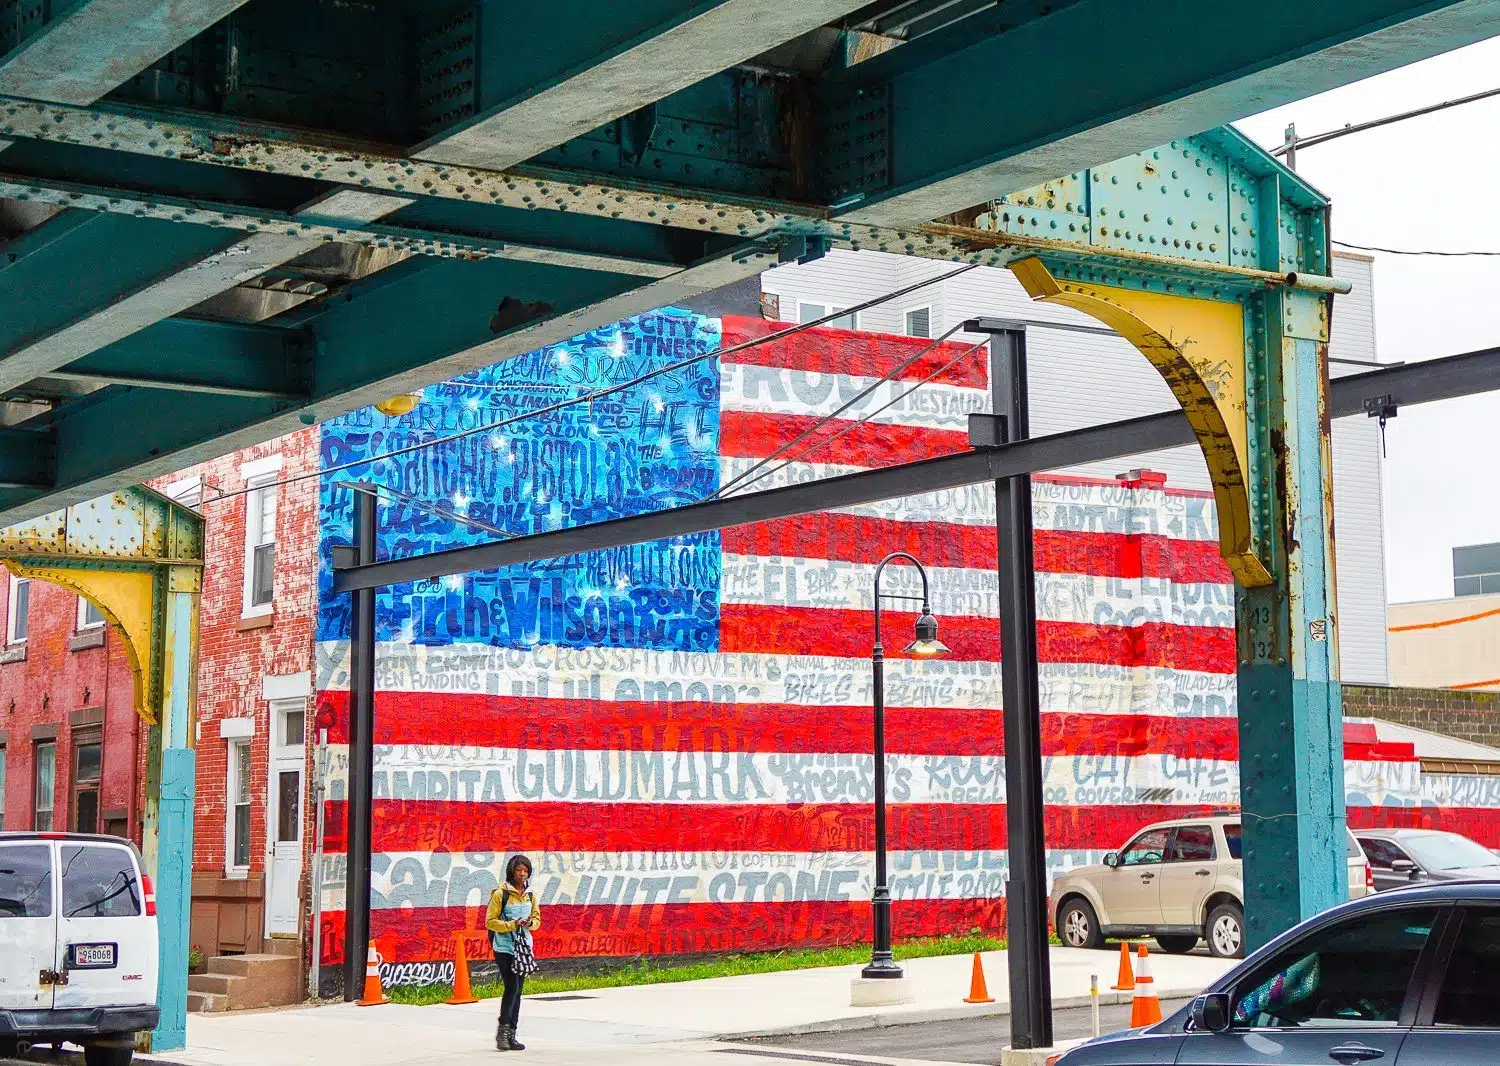 A flag mural, emblazoned with the names of local stores.